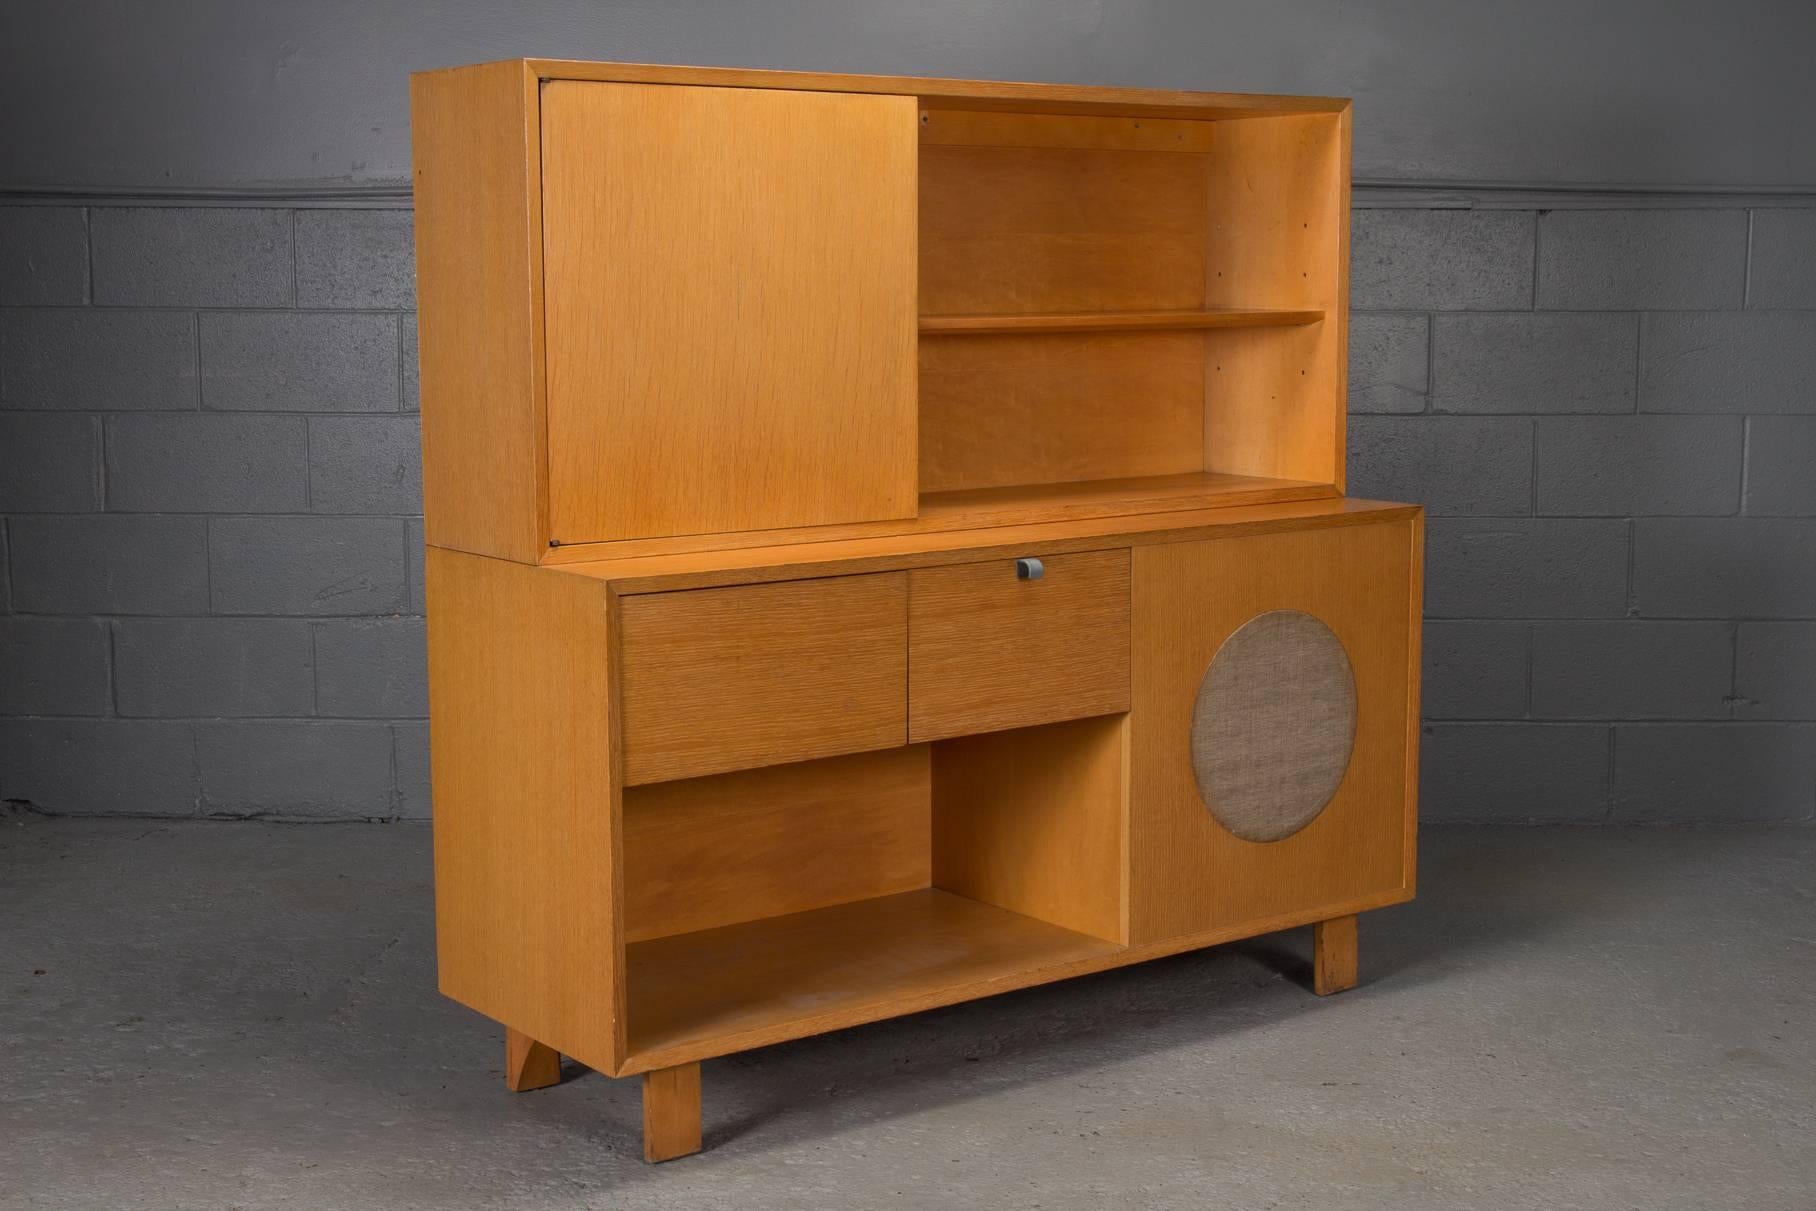 Stereo cabinet by George Nelson for Herman Miller. Original radio and record player intact. Two pieces.